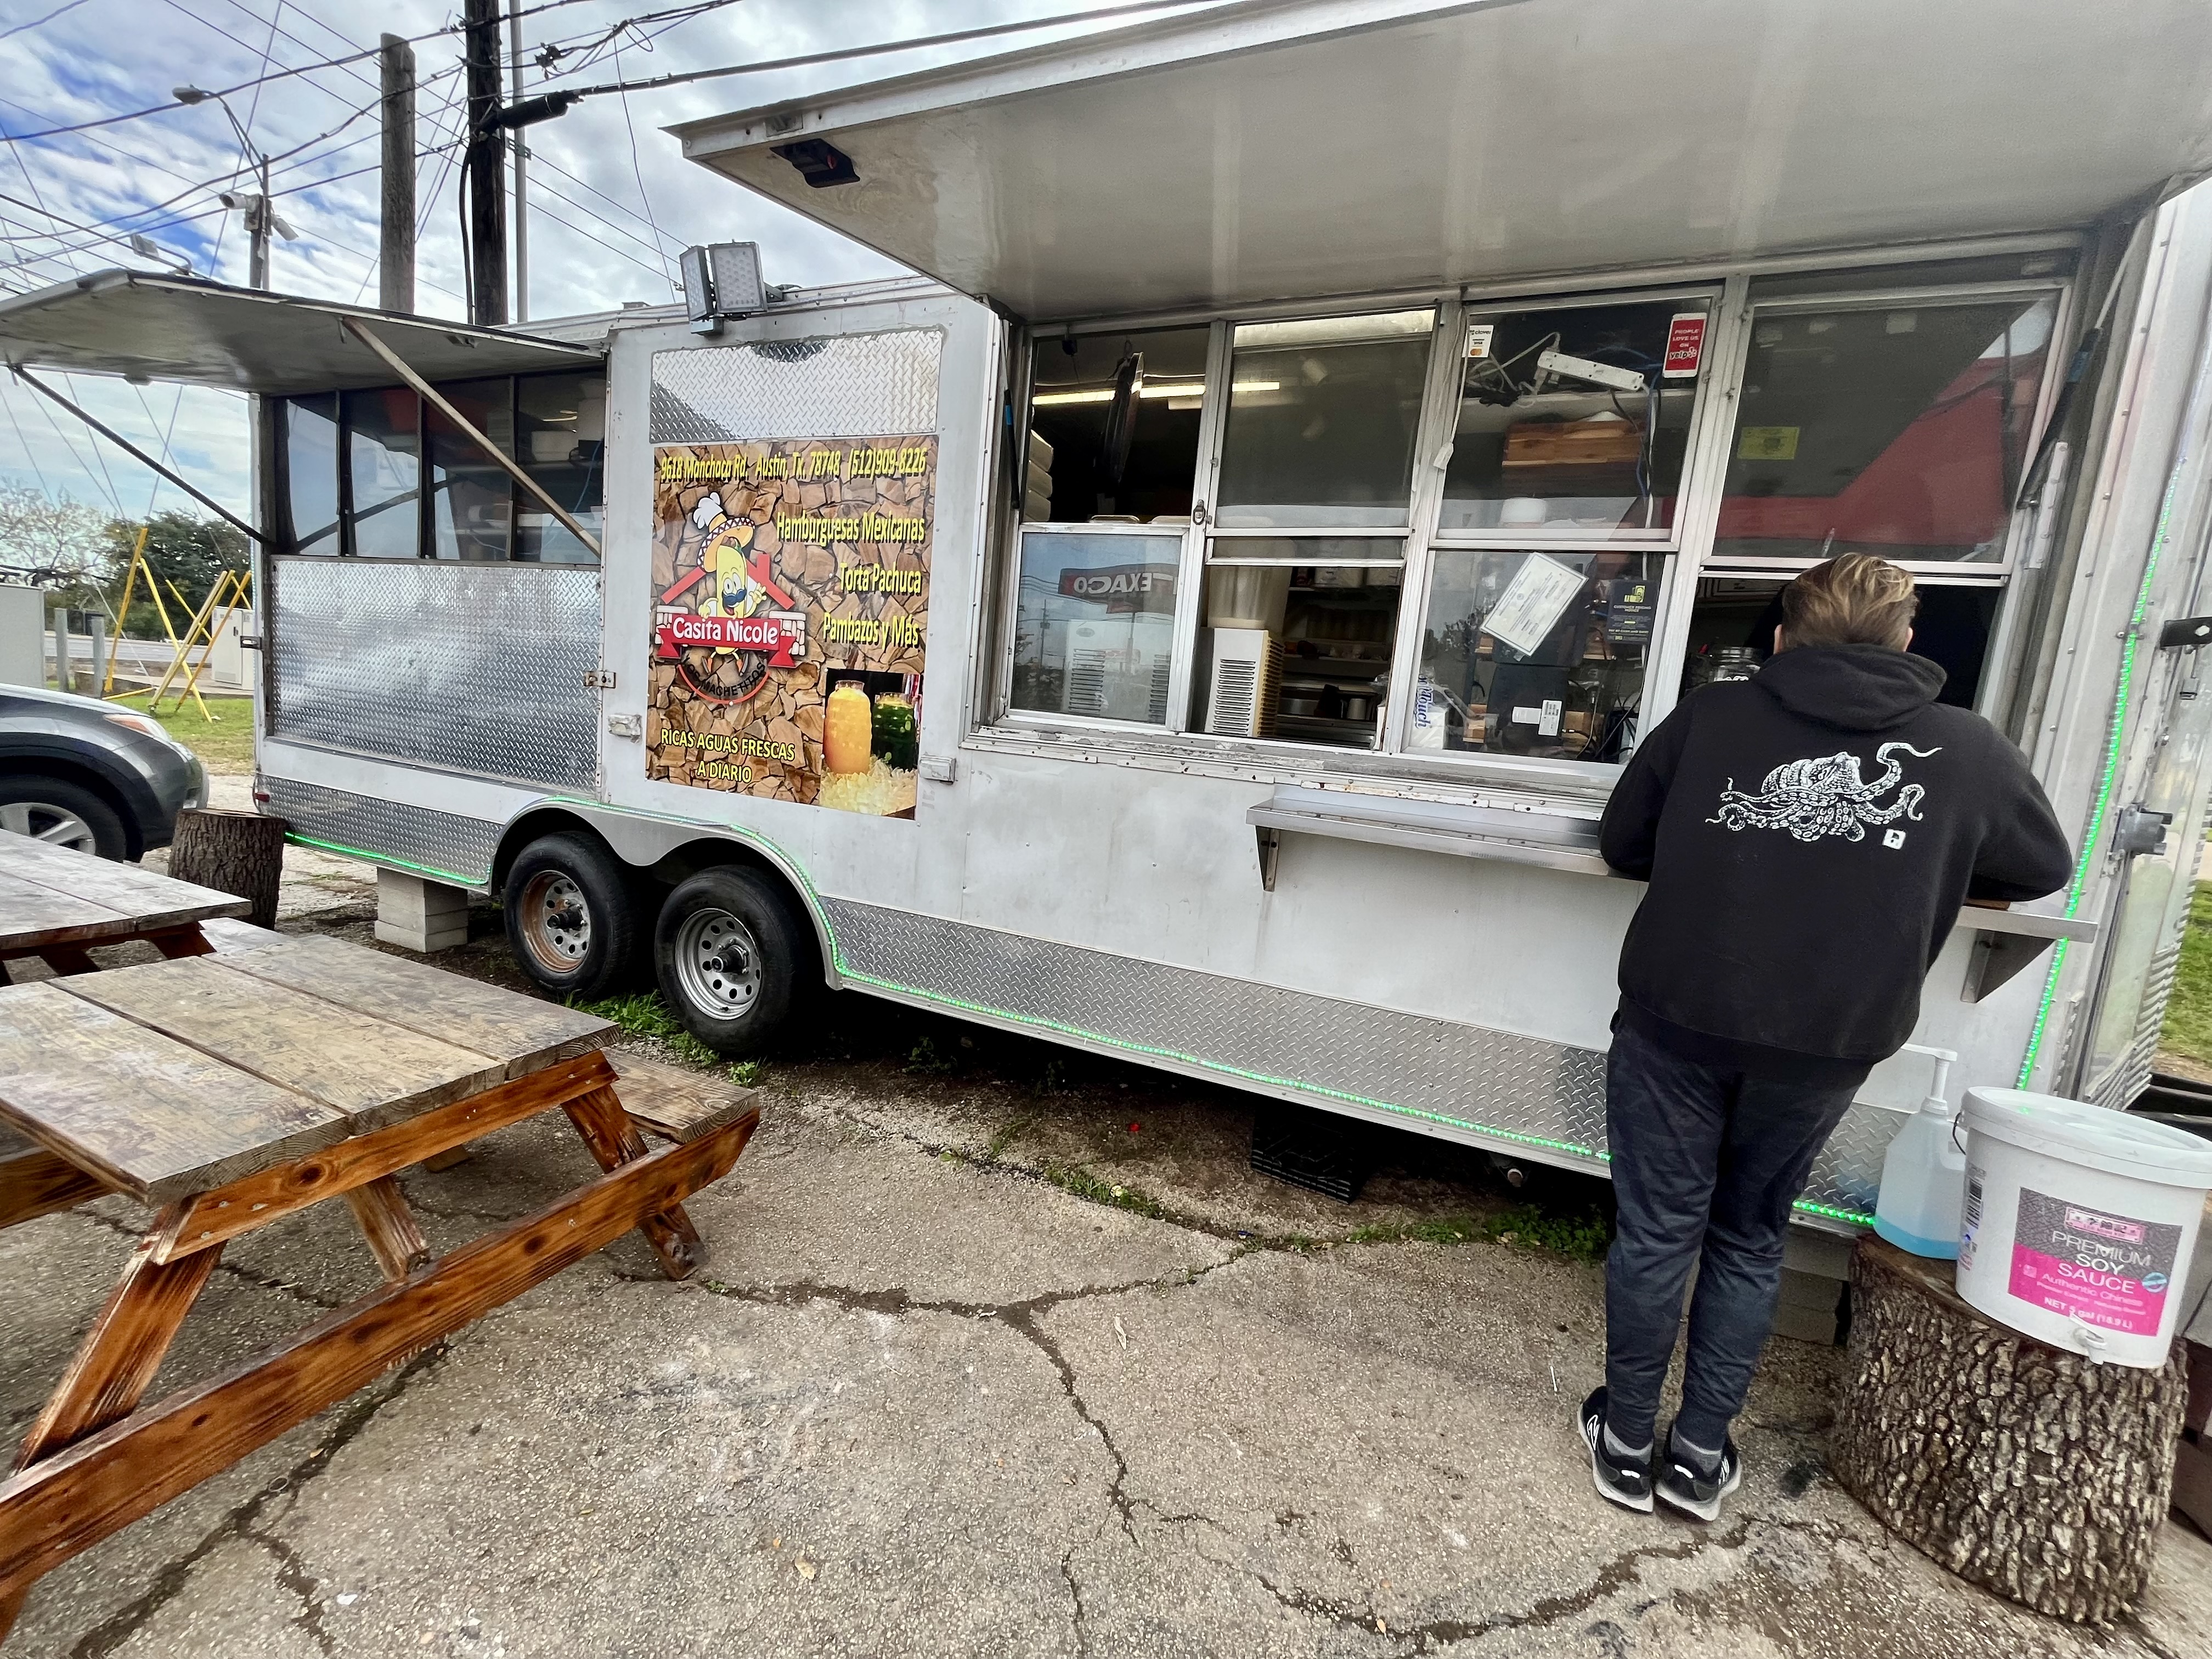 Food truck in South Austin serves up massively scrumptious machete 